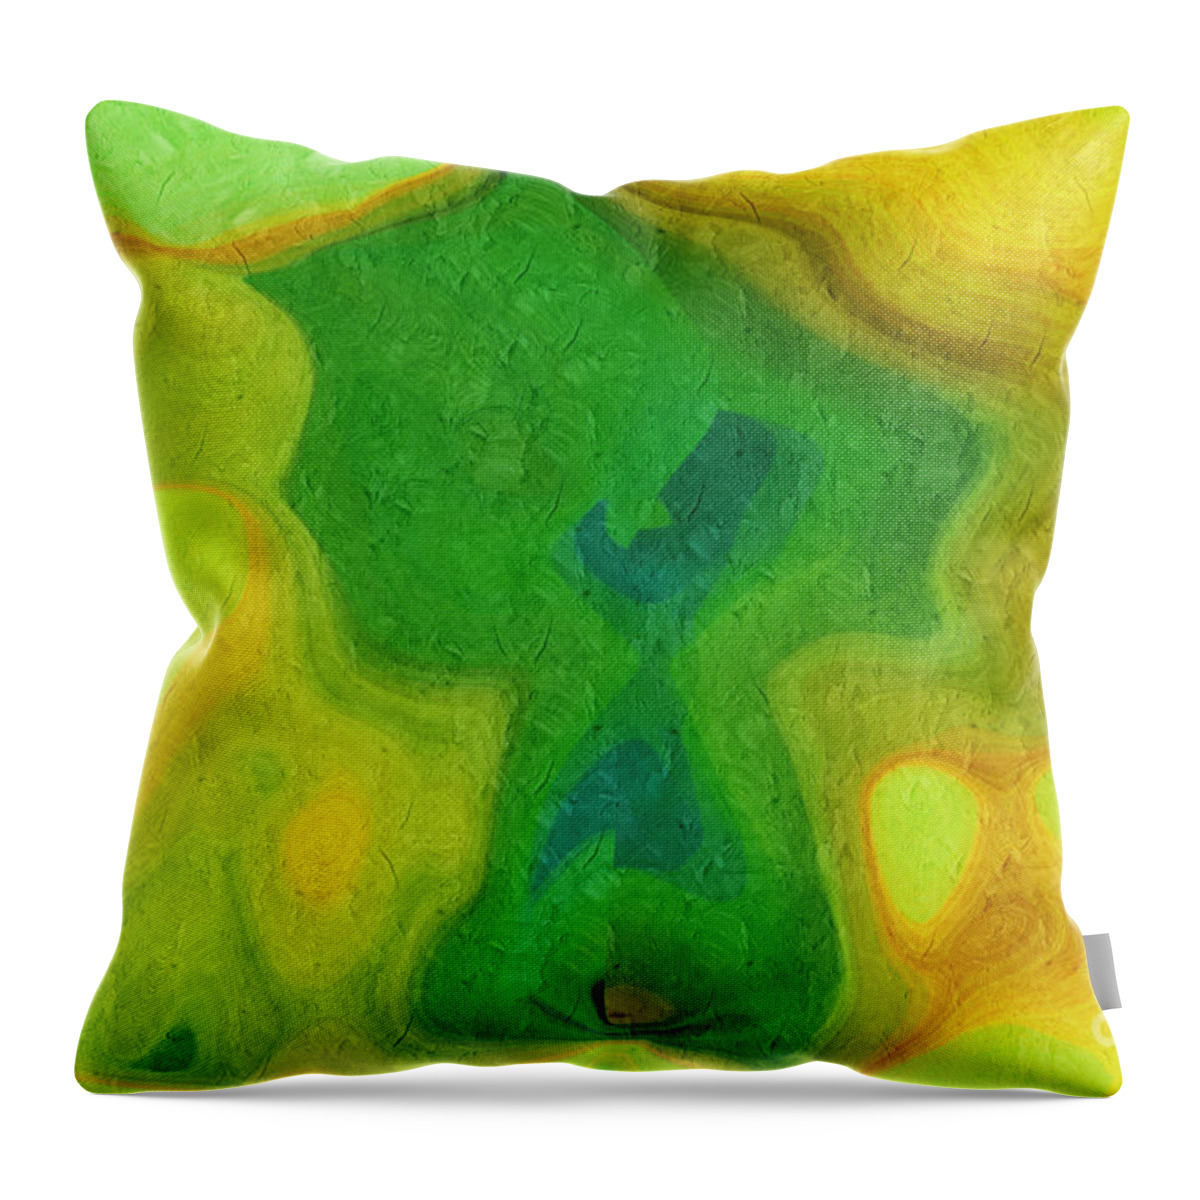 Abstract Throw Pillow featuring the digital art My Teddy Bear - Digital Painting - Abstract by Andee Design